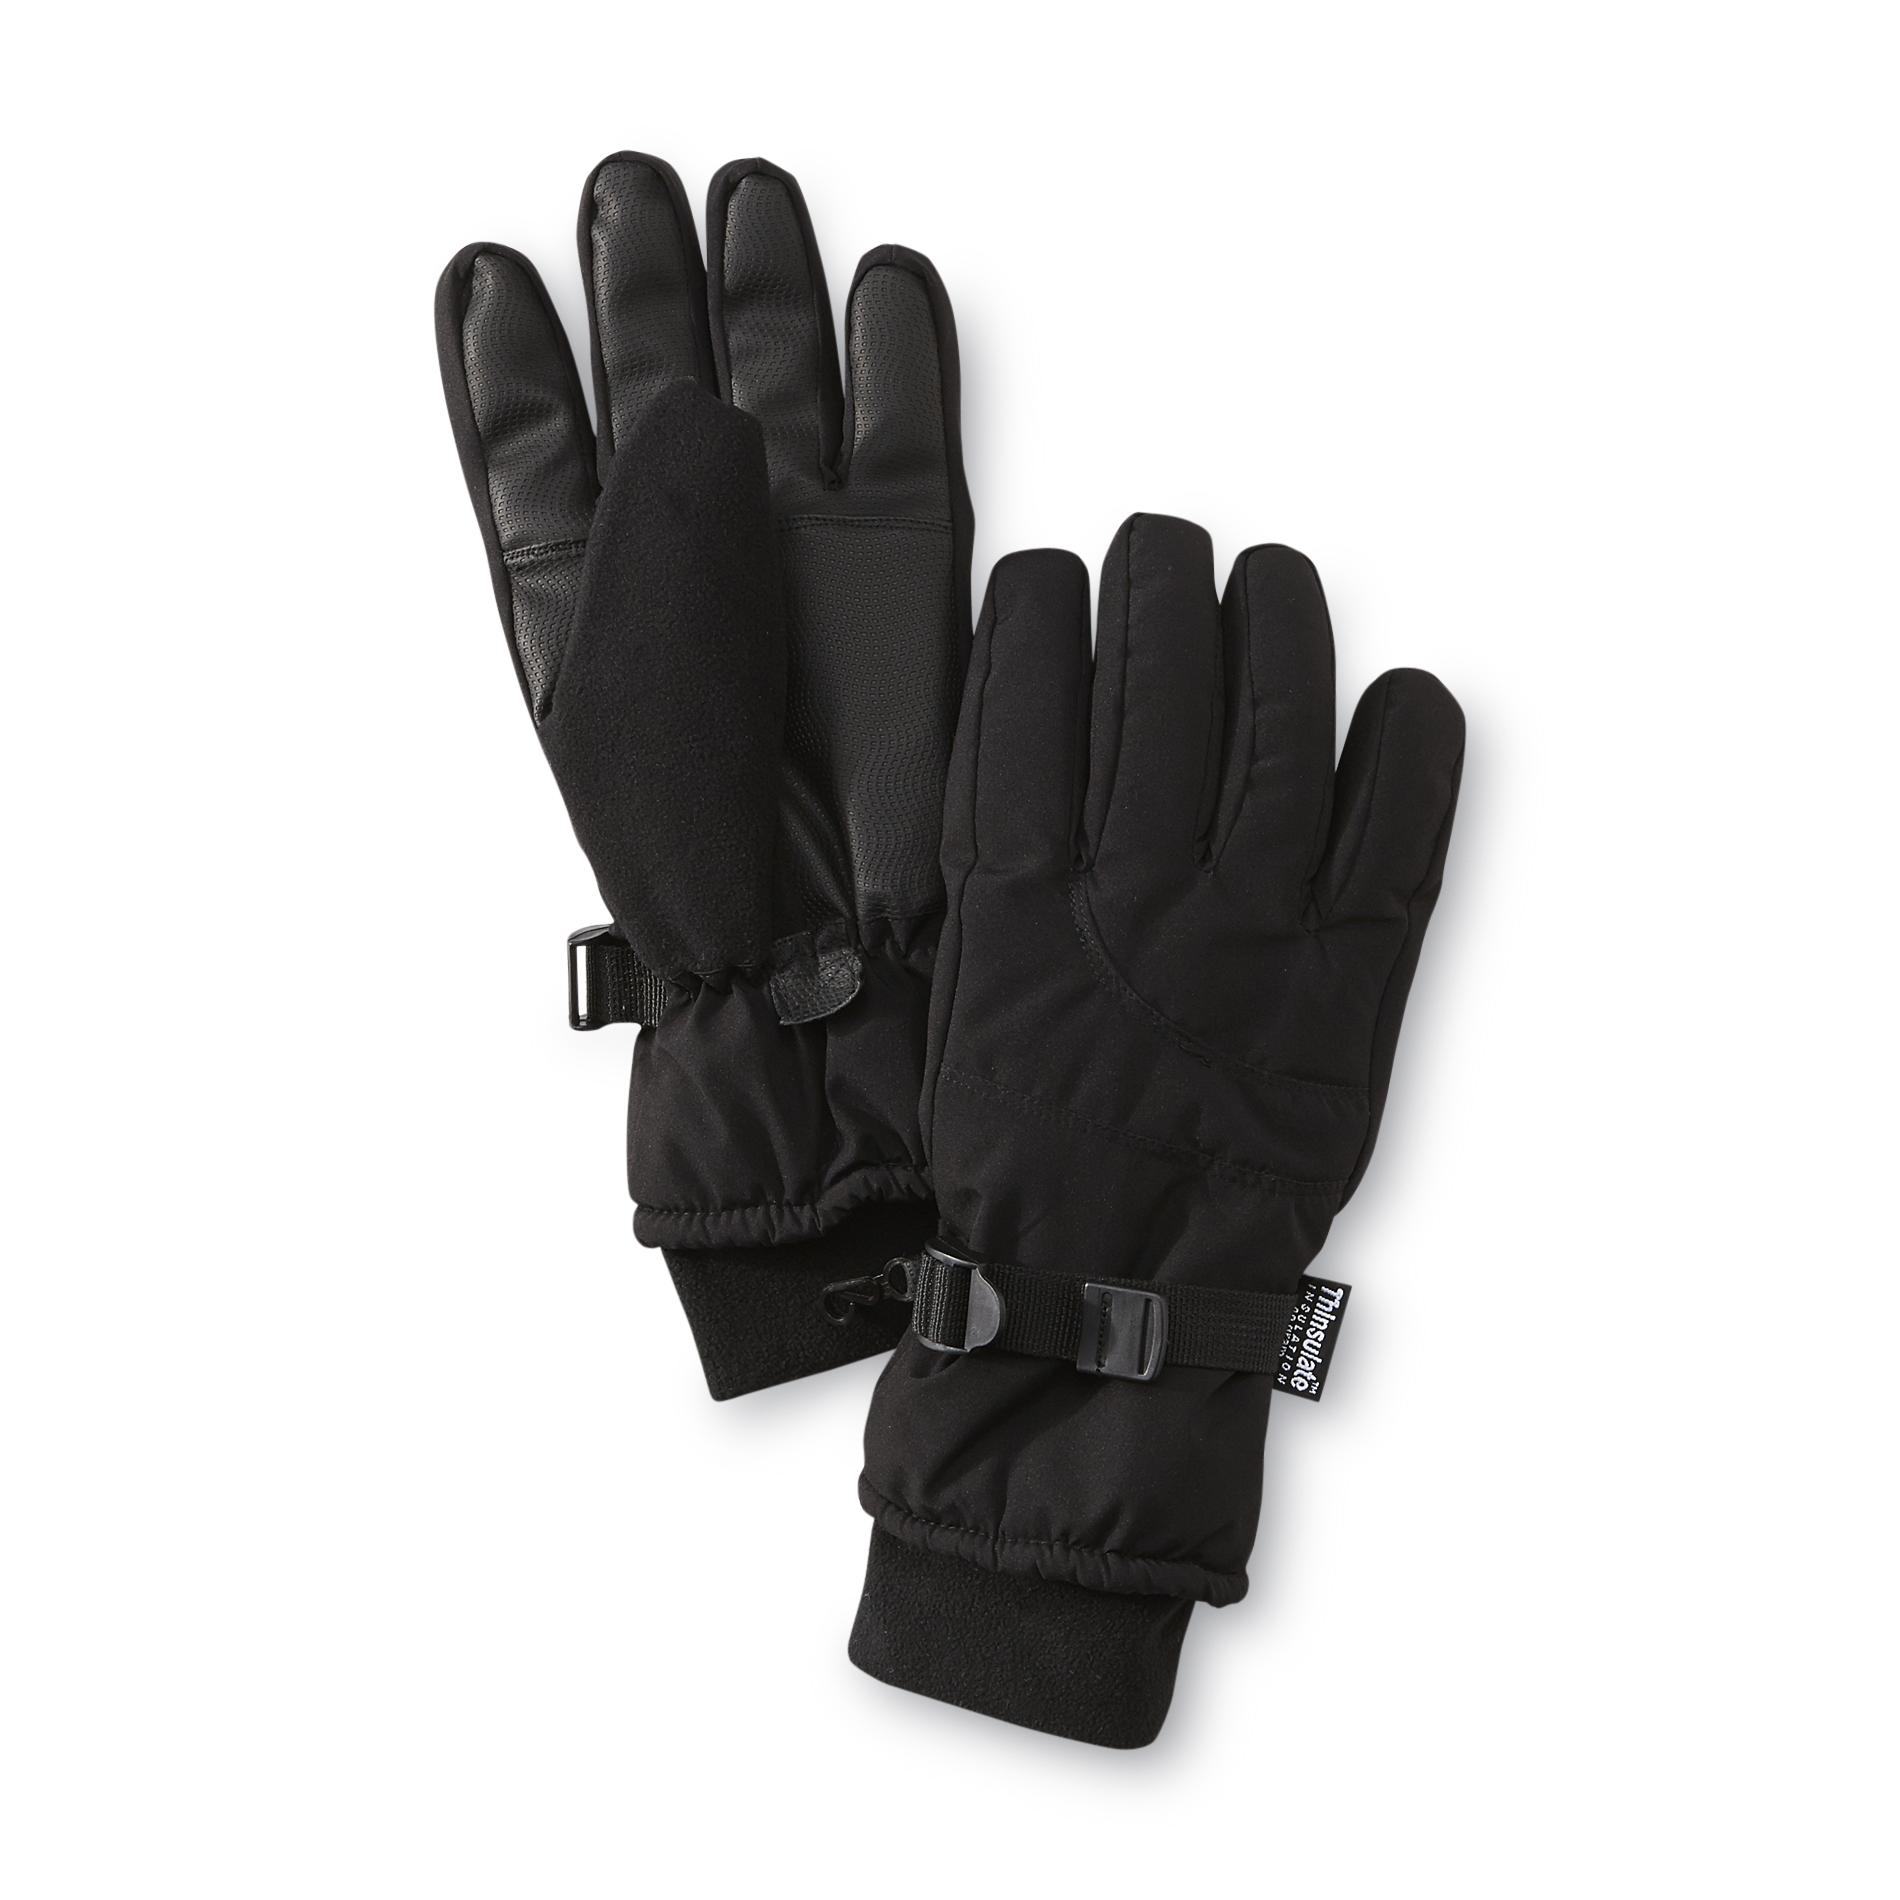 NordicTrack Men's Touch-Screen Friendly Ski Gloves